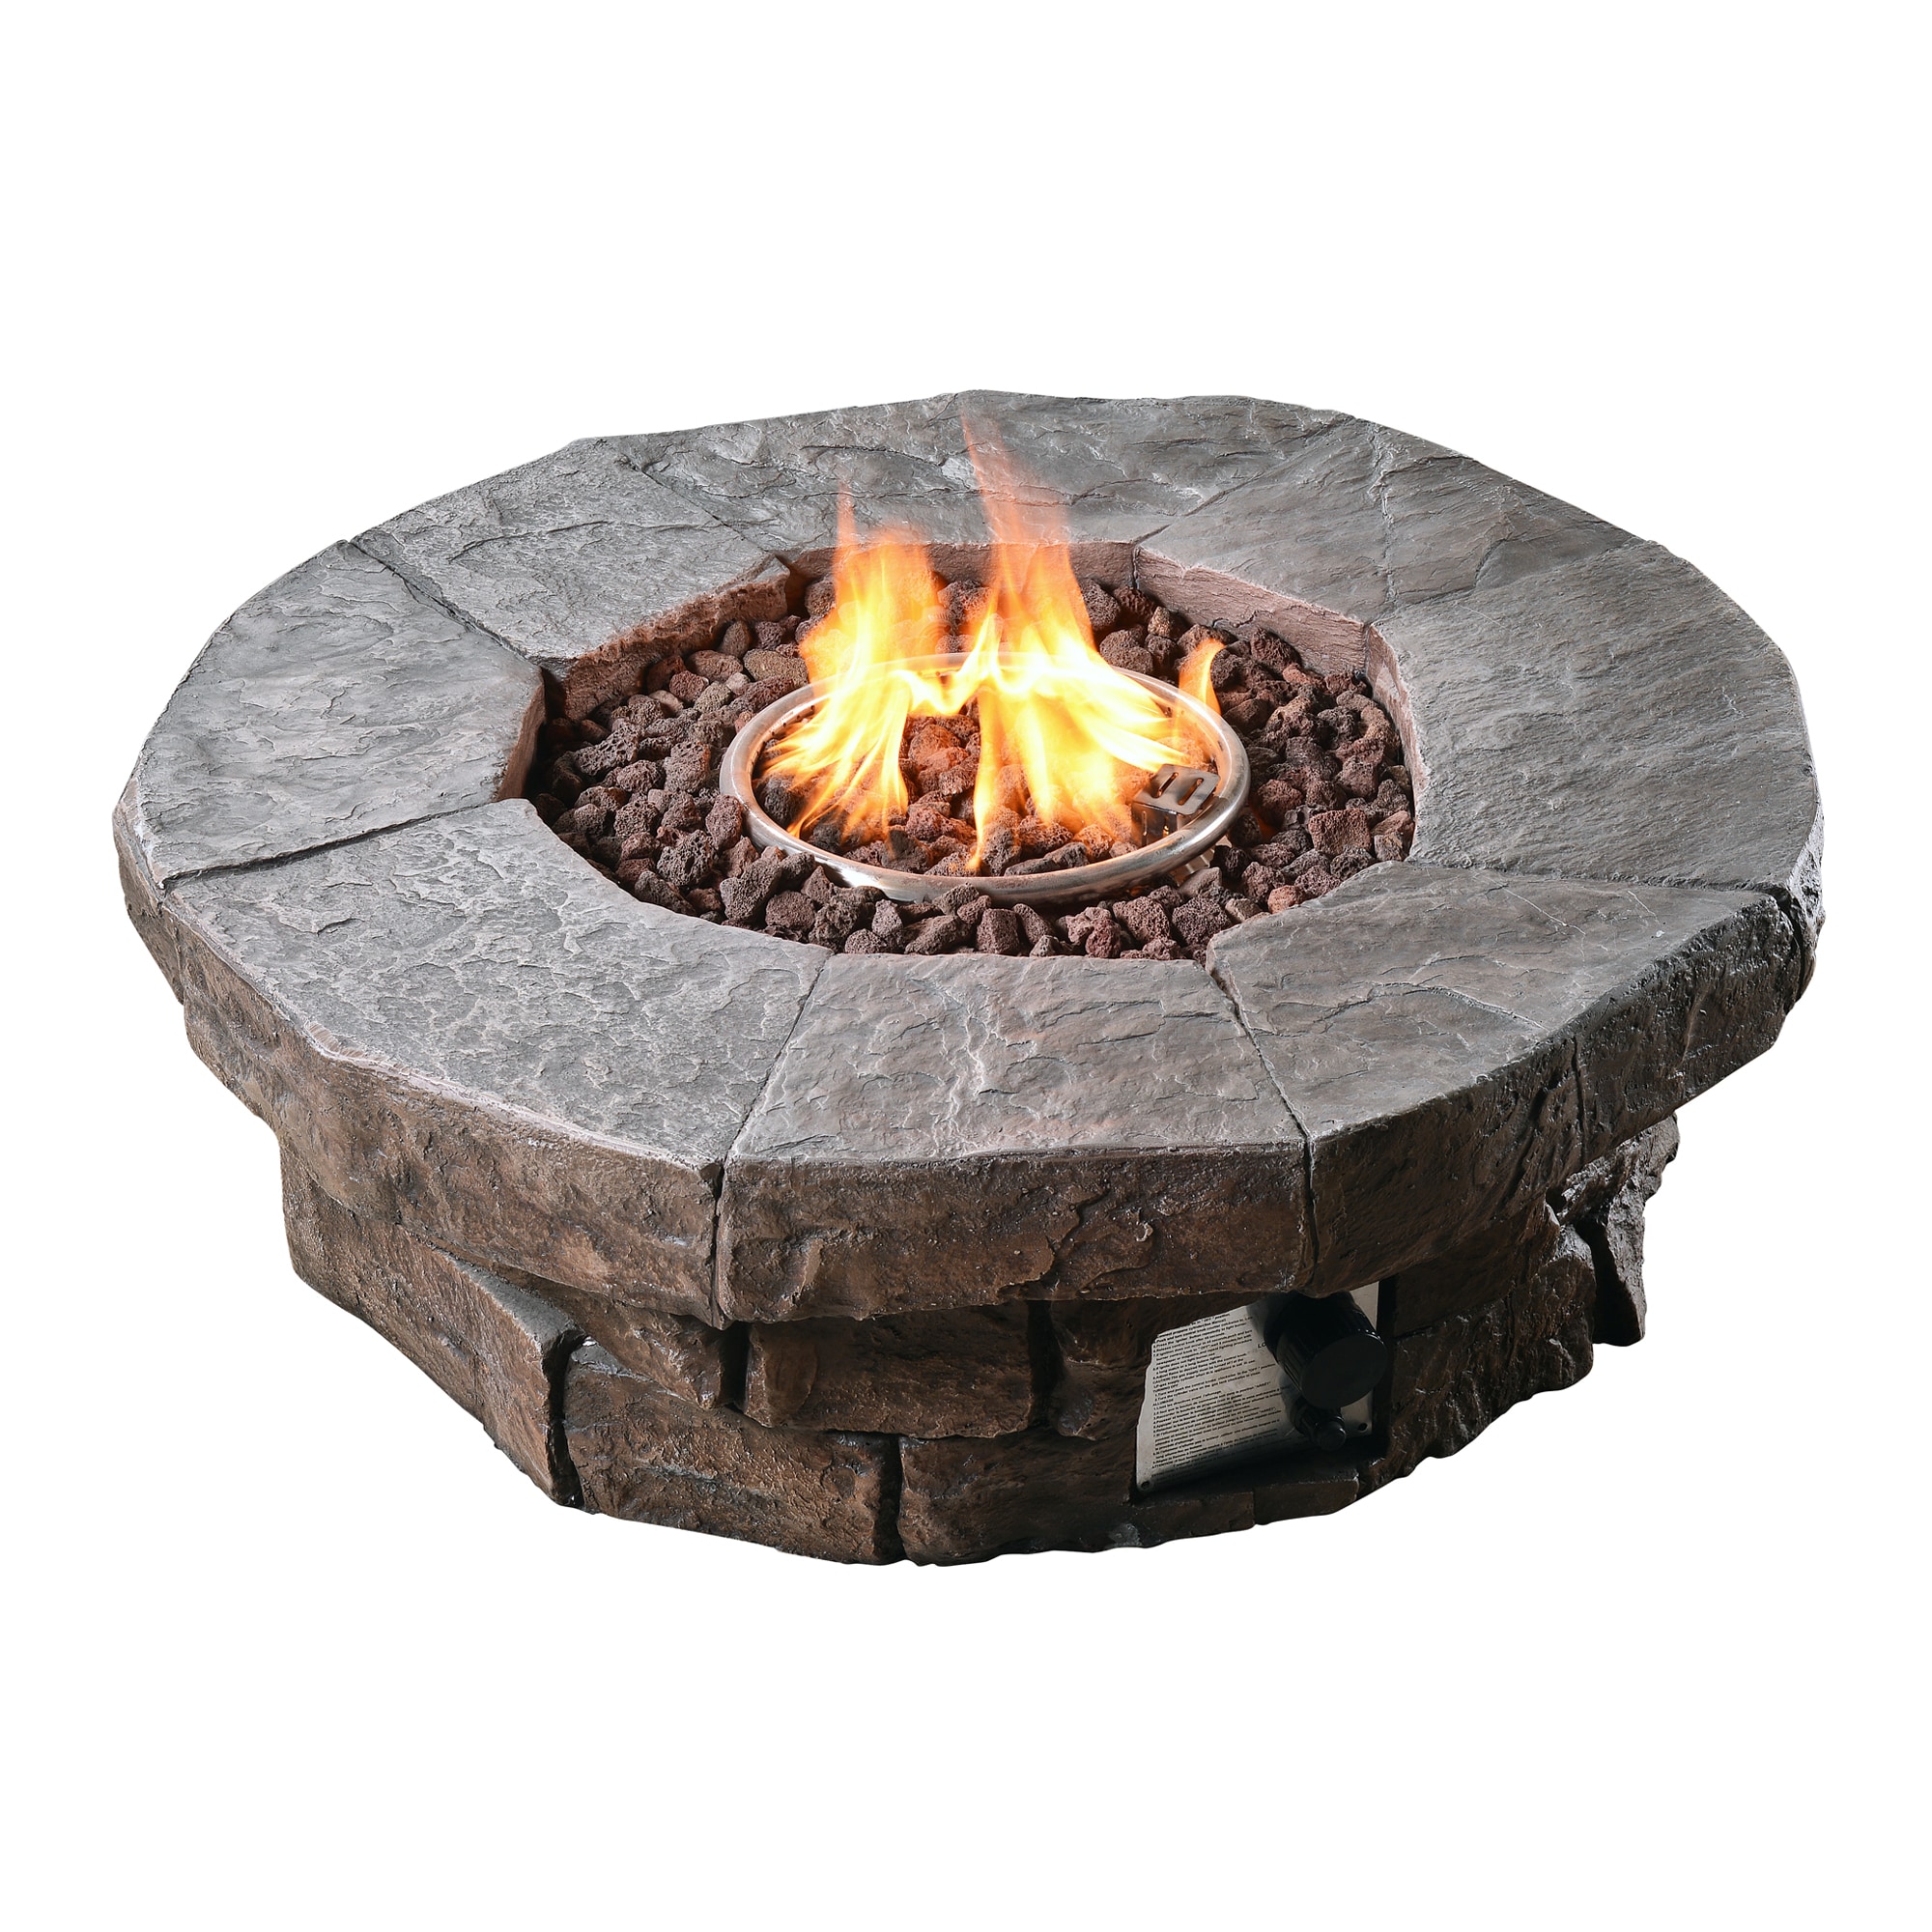 Teamson Propane Fire Pits 37 01 In W 50000 Btu Brown Concrete Propane Gas Fire Pit In The Gas Fire Pits Department At Lowes Com